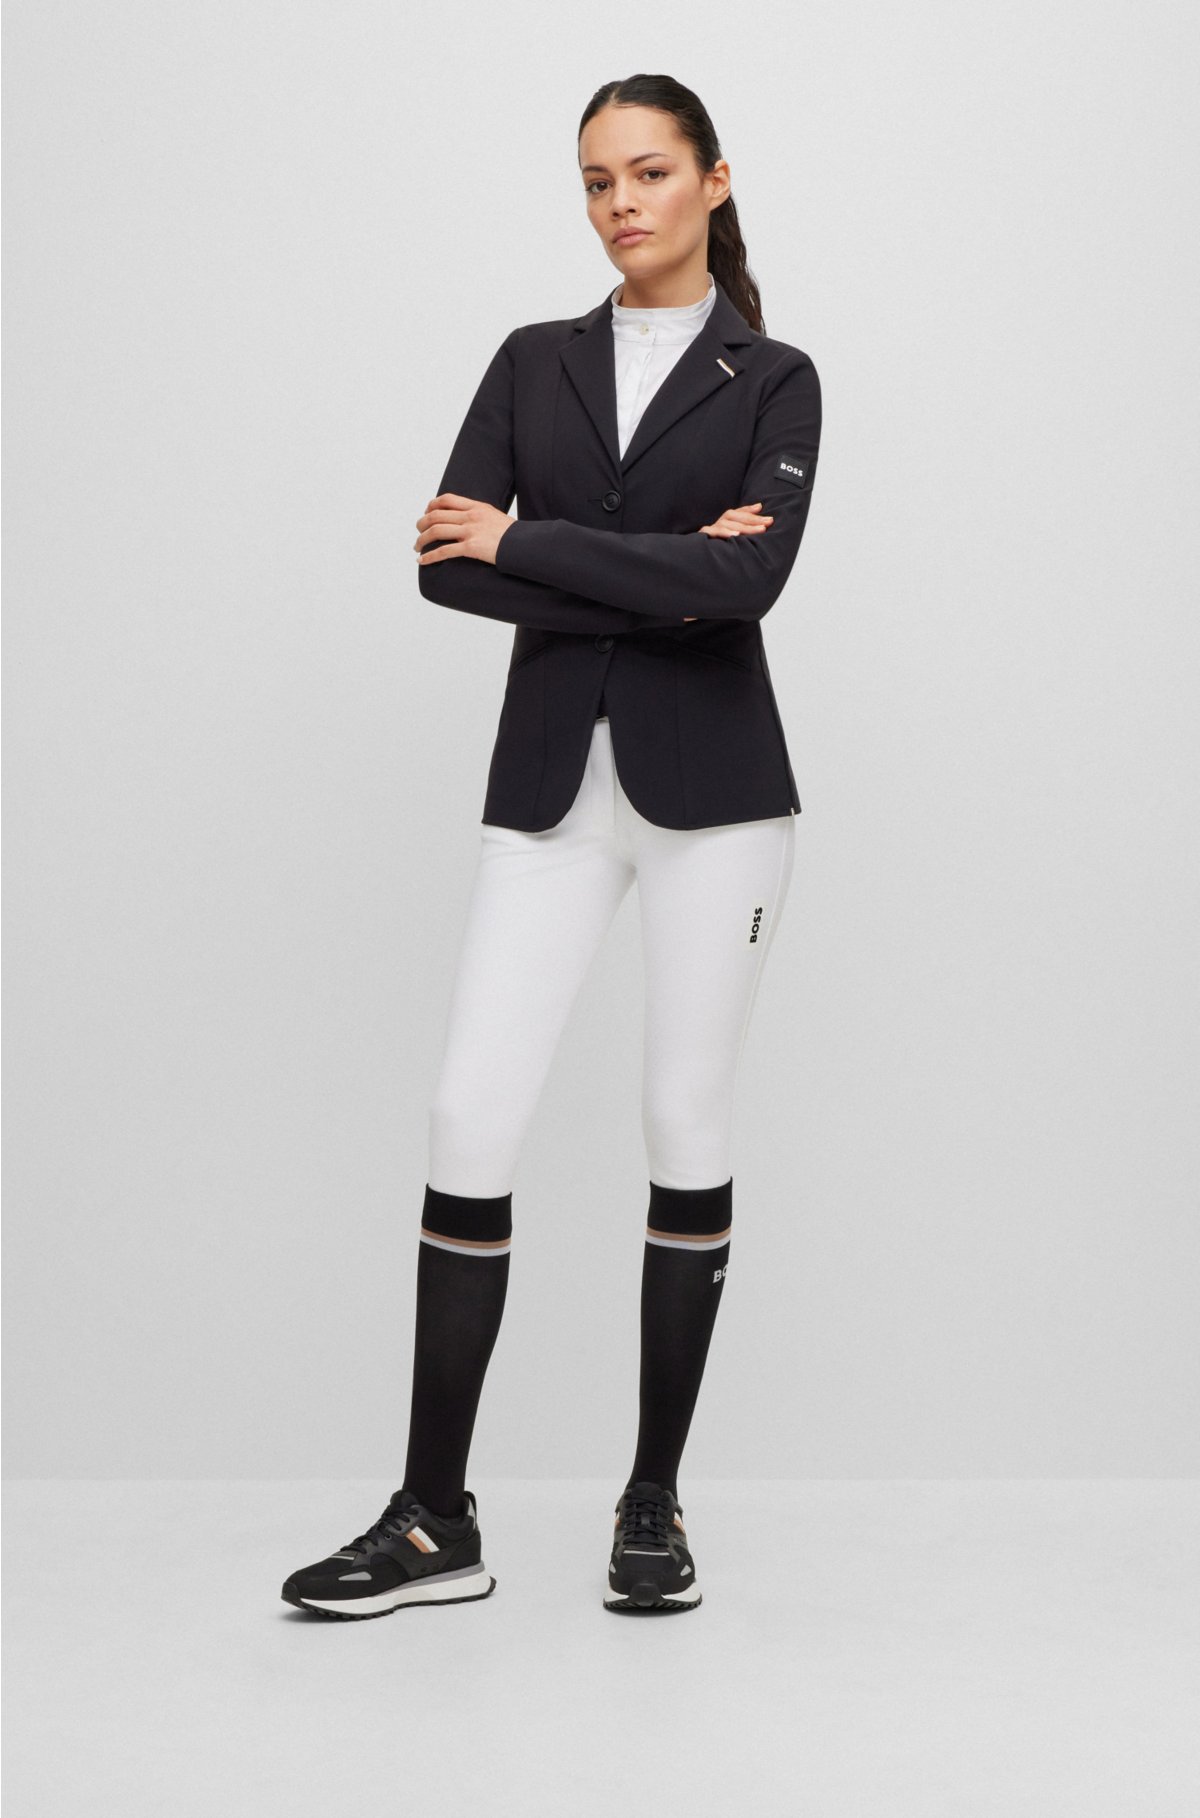 Equestrian slim-fit show blouse in mixed materials, White